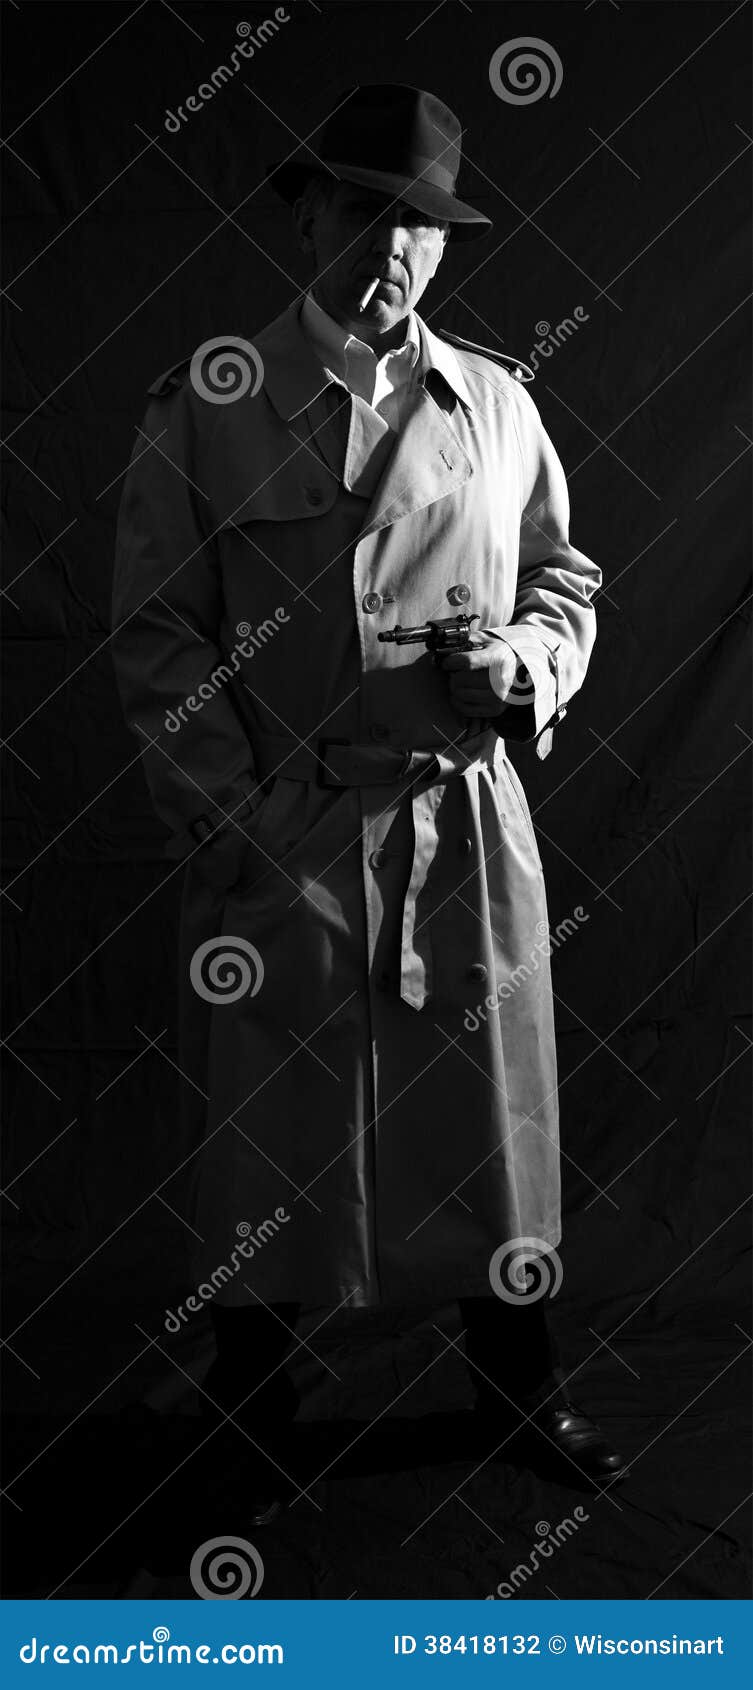 thirties or forties vintage retro style private detective man